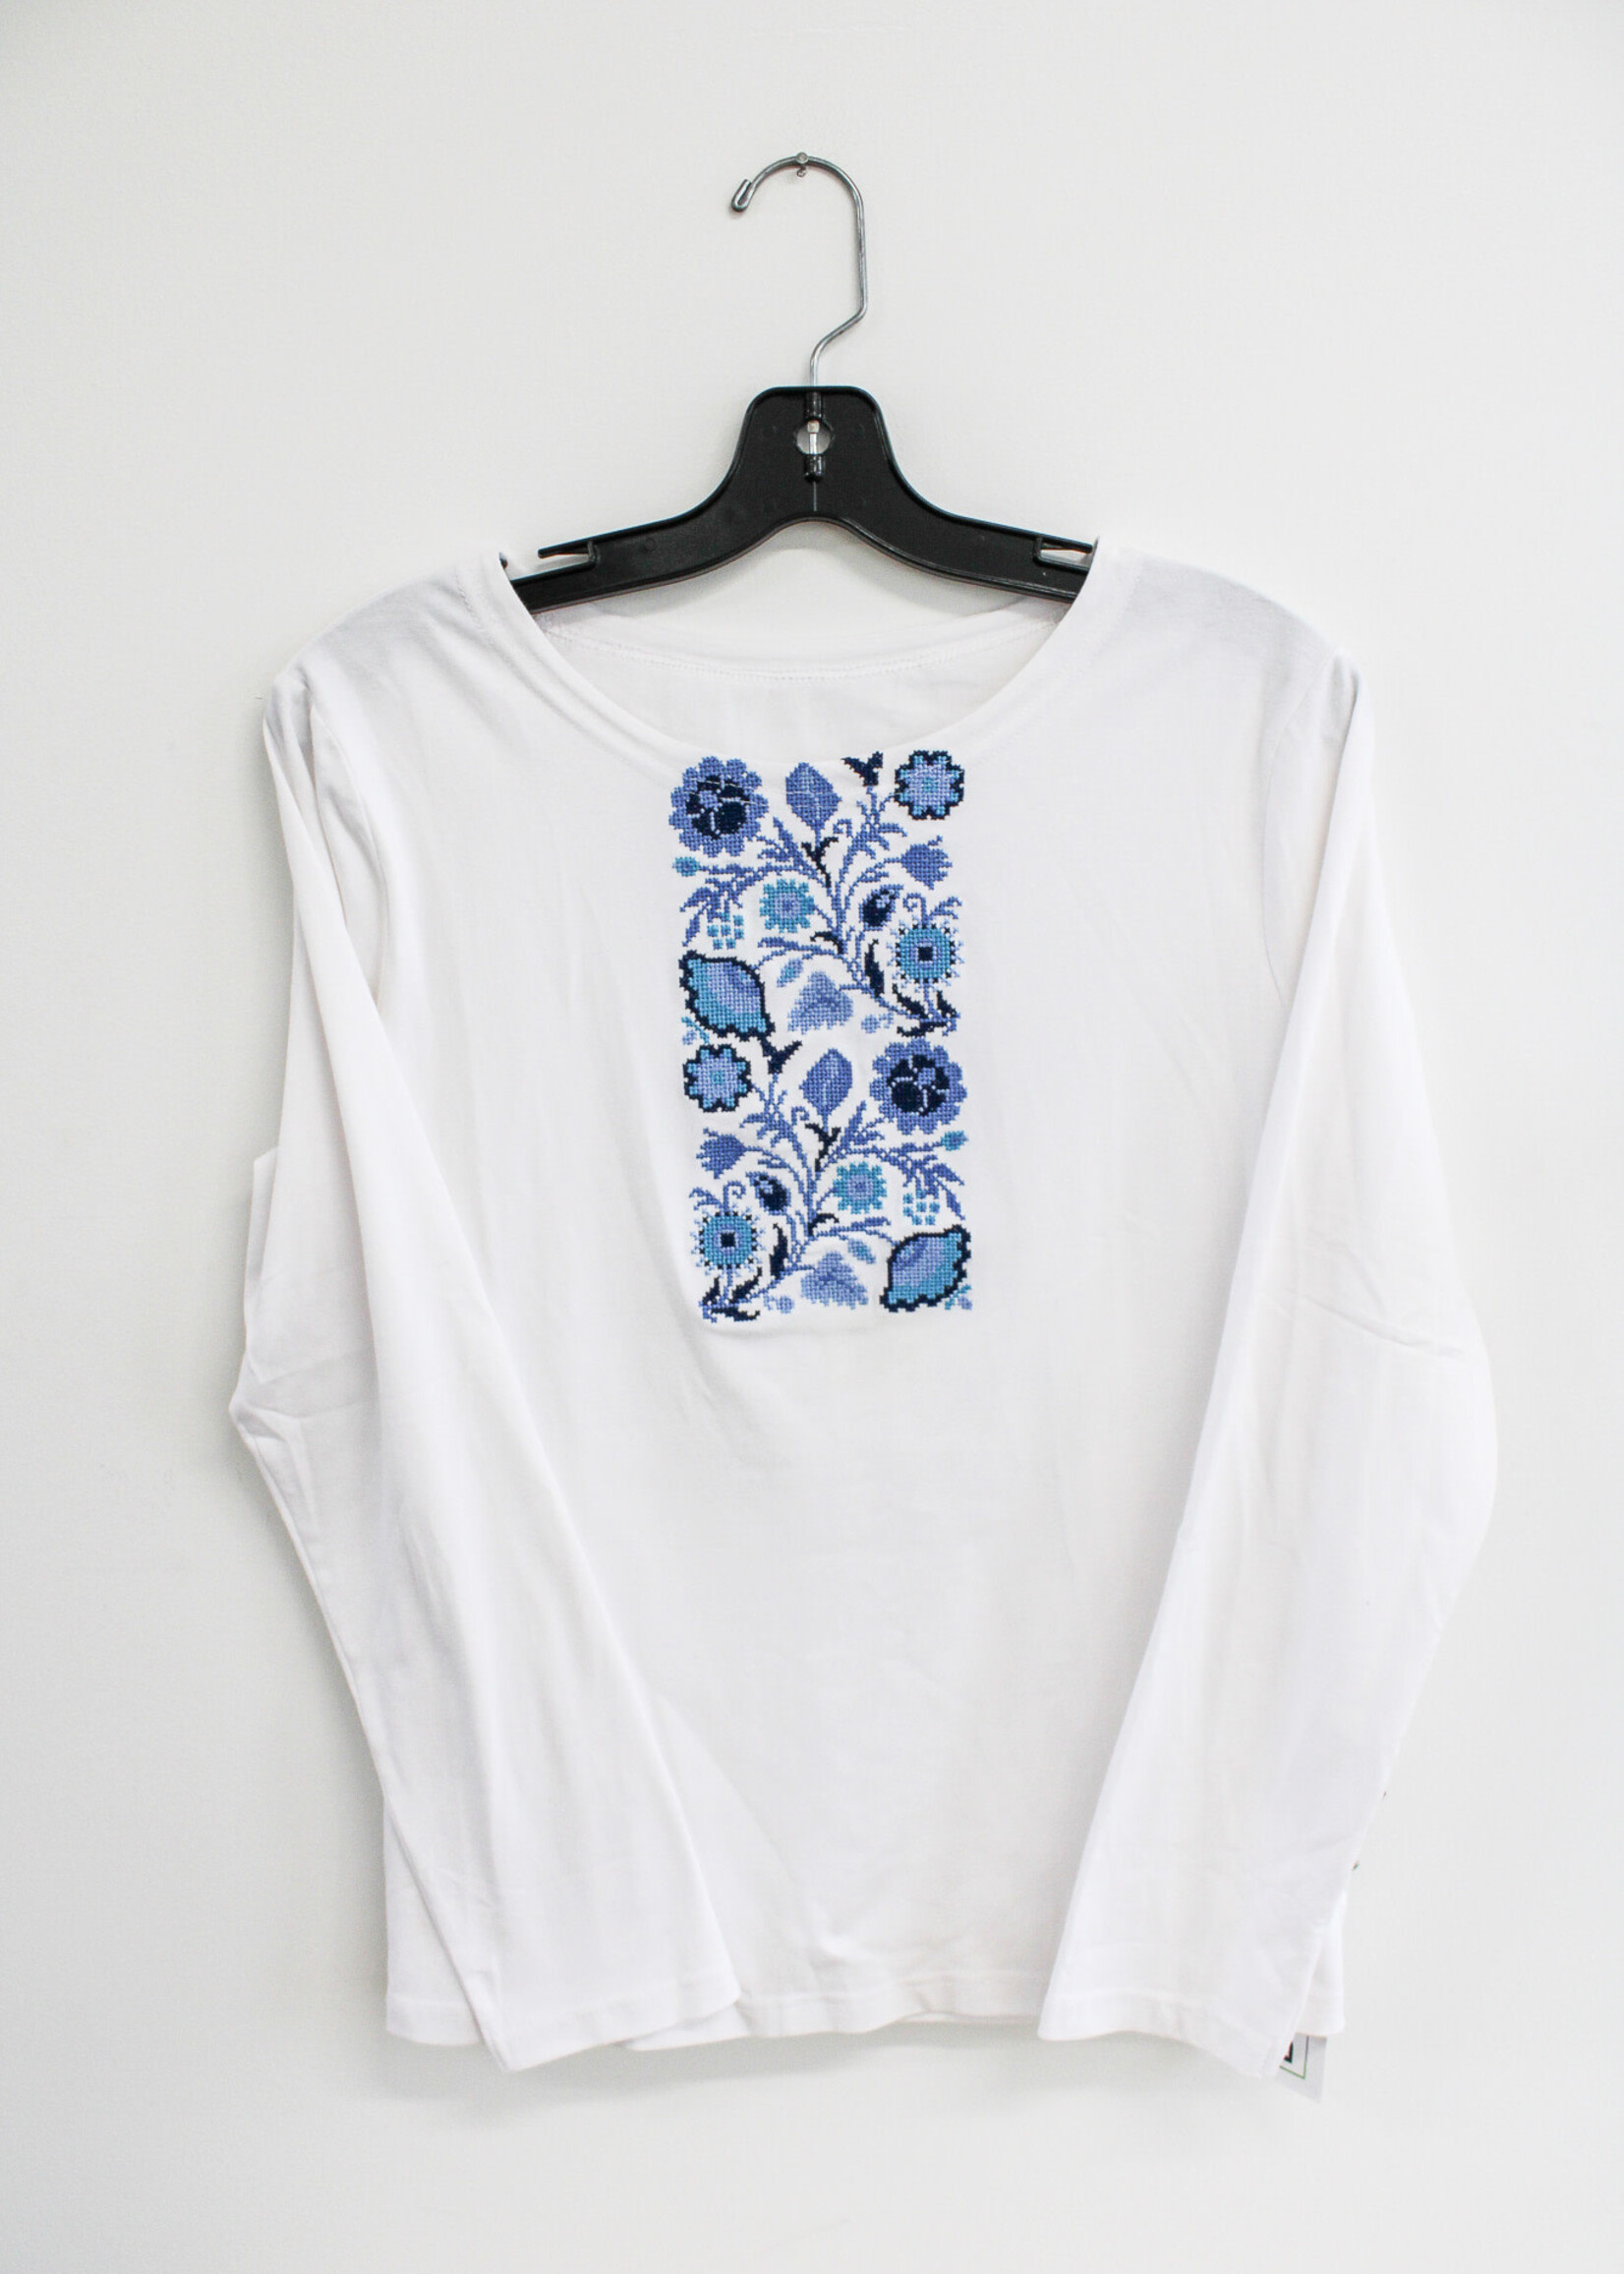 APPAREL- SWEATSHIRT(W) - White, Size 50, with Blue Floral Embroidery